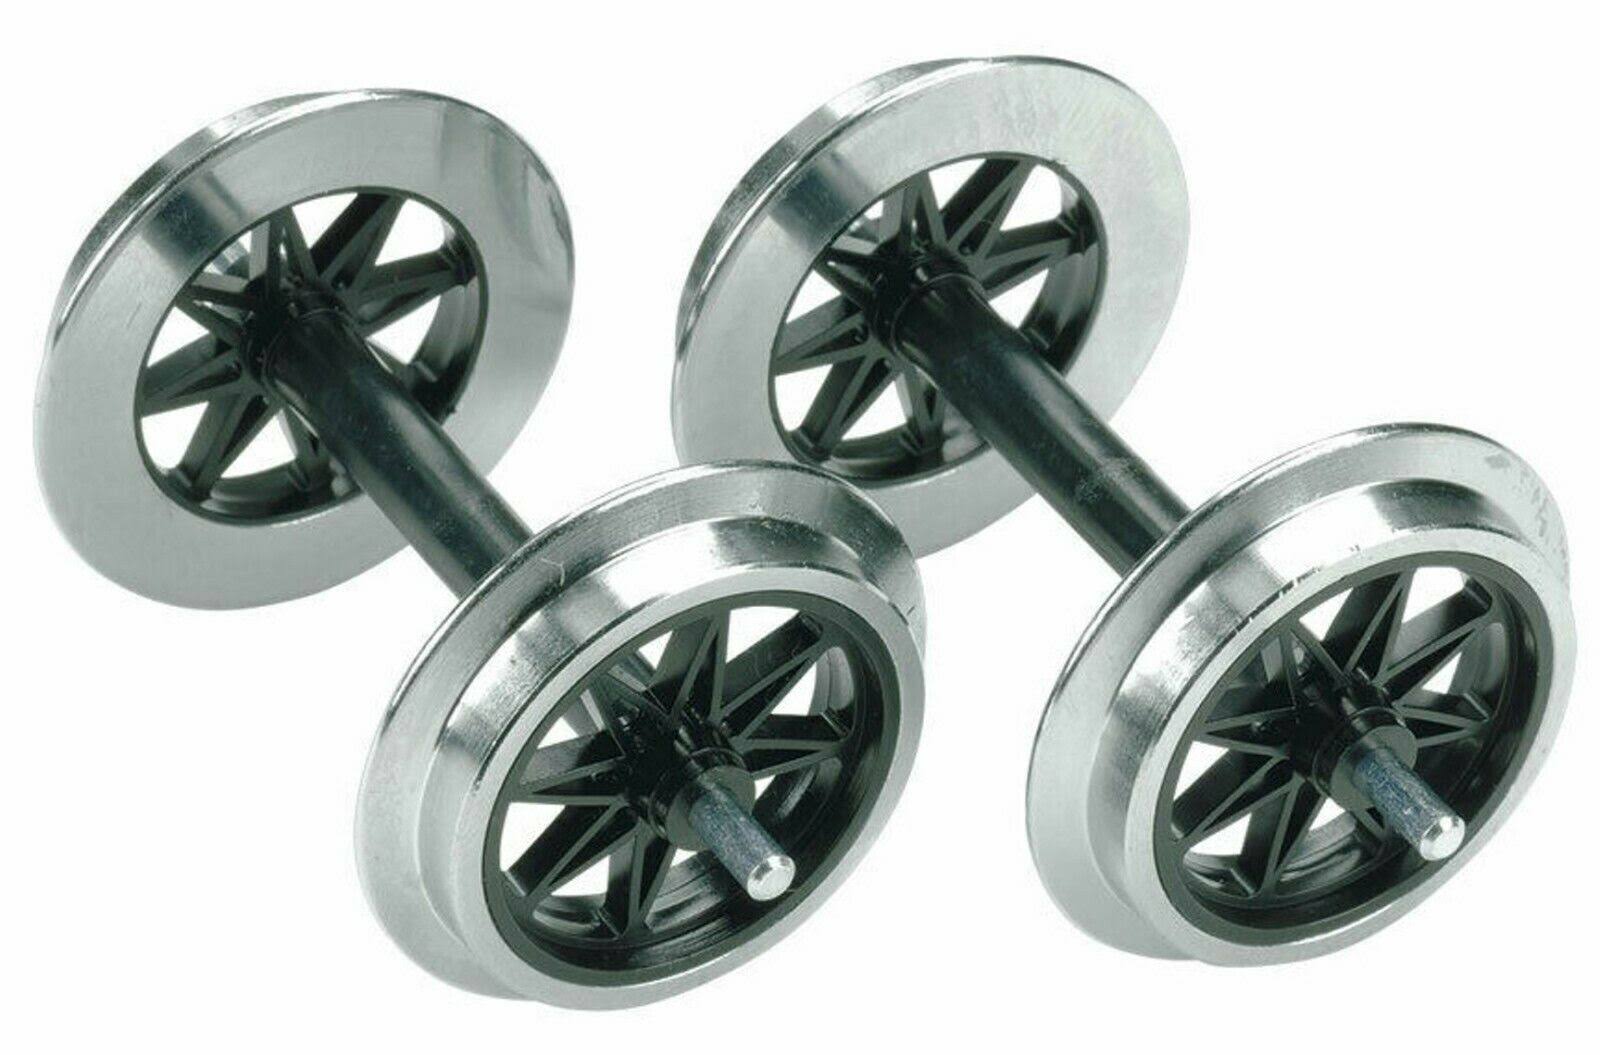 LGB 67320 - Metal Double-Spoked Wheel Sets, 2 Pieces